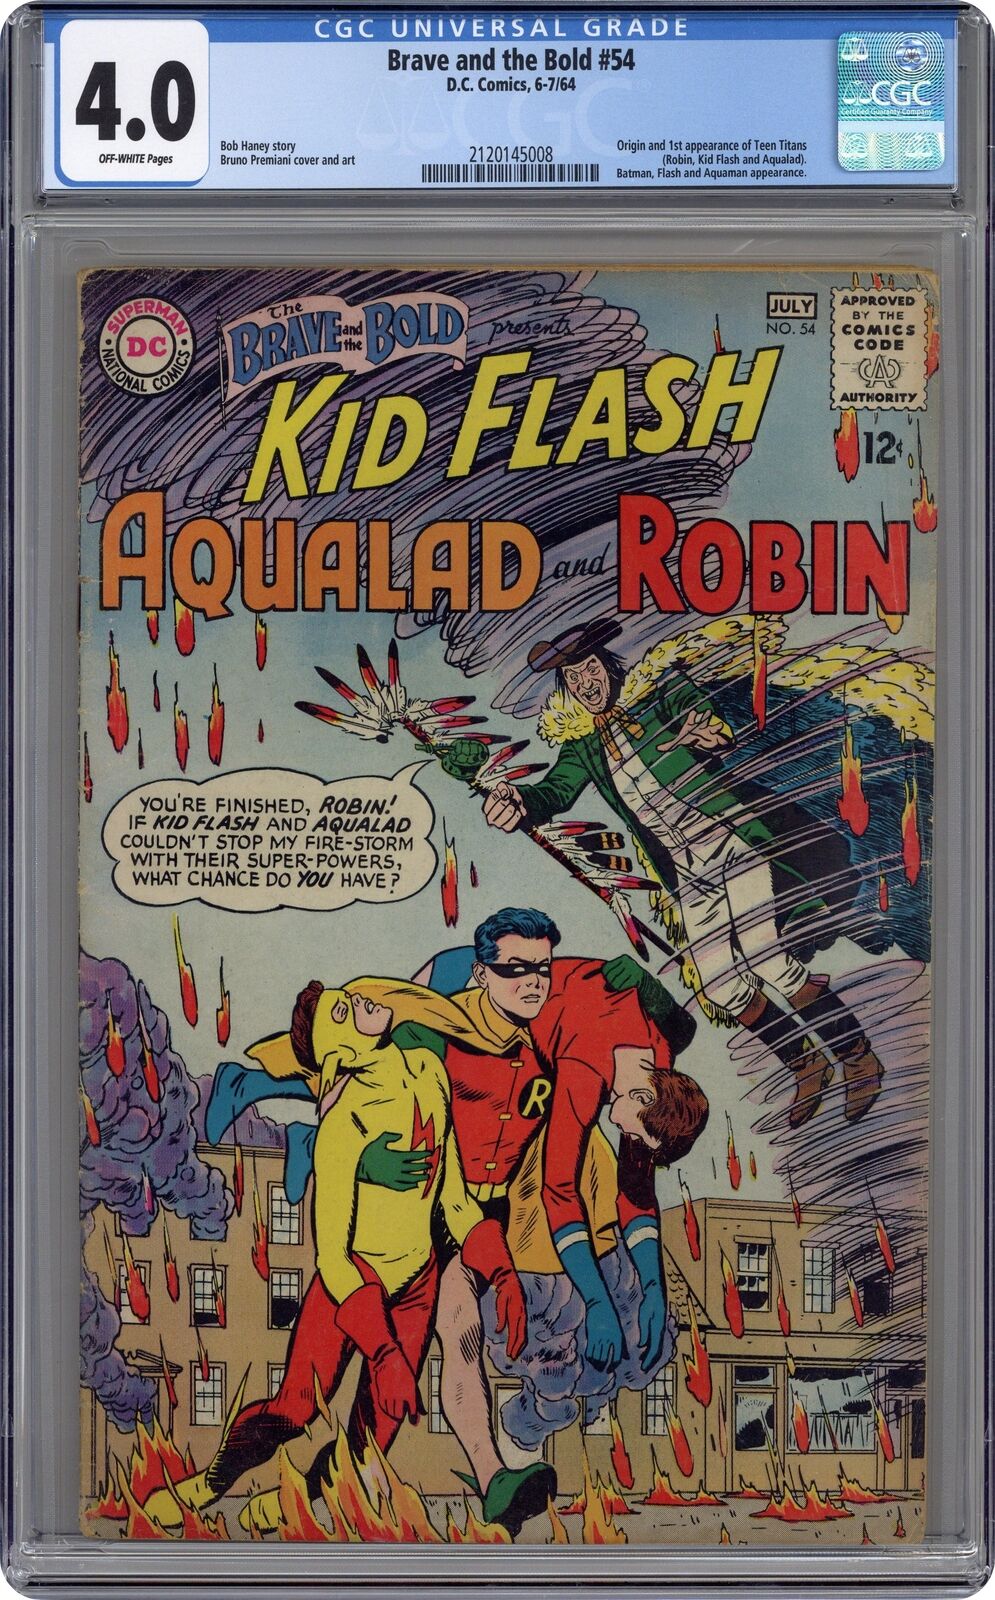 Brave and the Bold #54 CGC 4.0 1964 2120145008 1st app. and origin Teen Titans